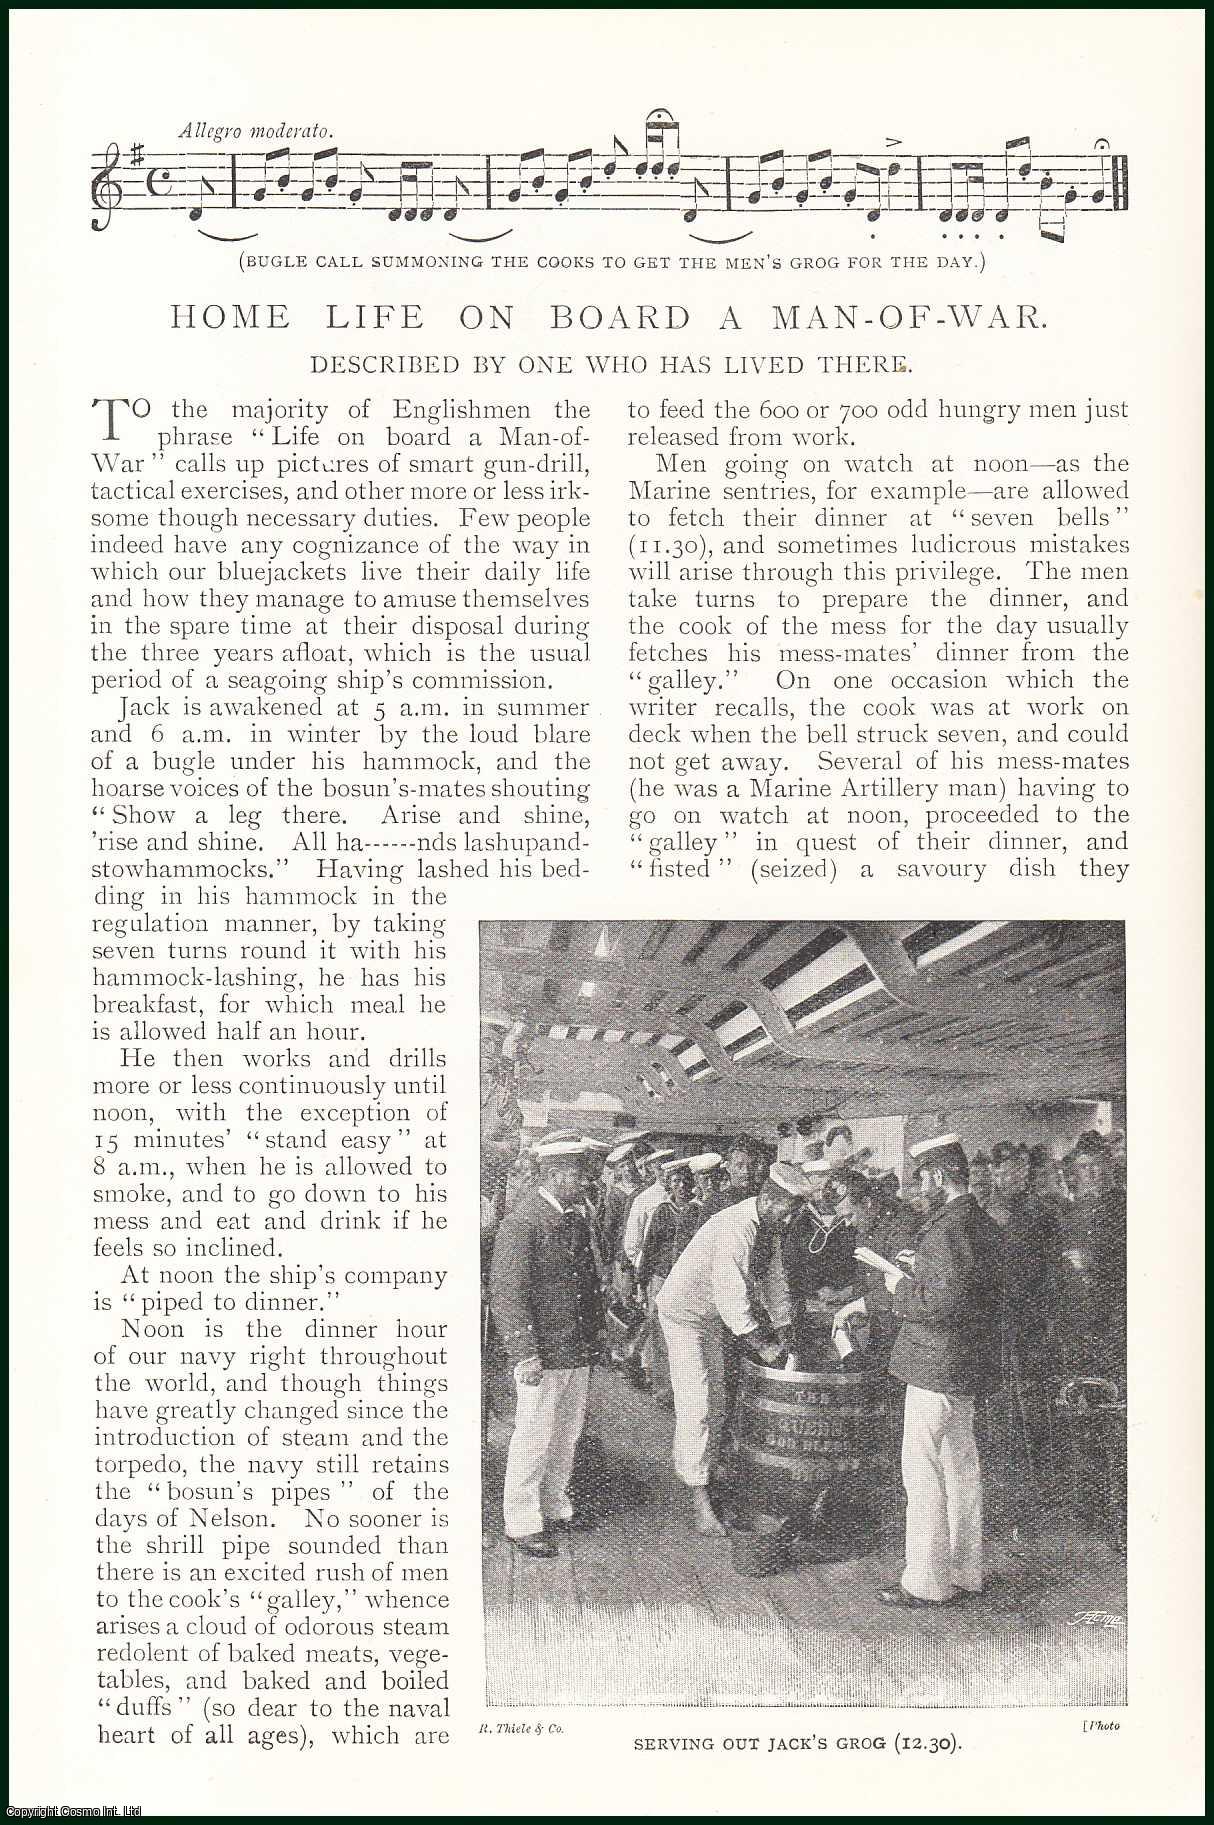 ---, --- - Home Life on Board a Man-of-War. Described By One One Who Has Lived There. A rare original article from the Harmsworth London Magazine, 1898-99.